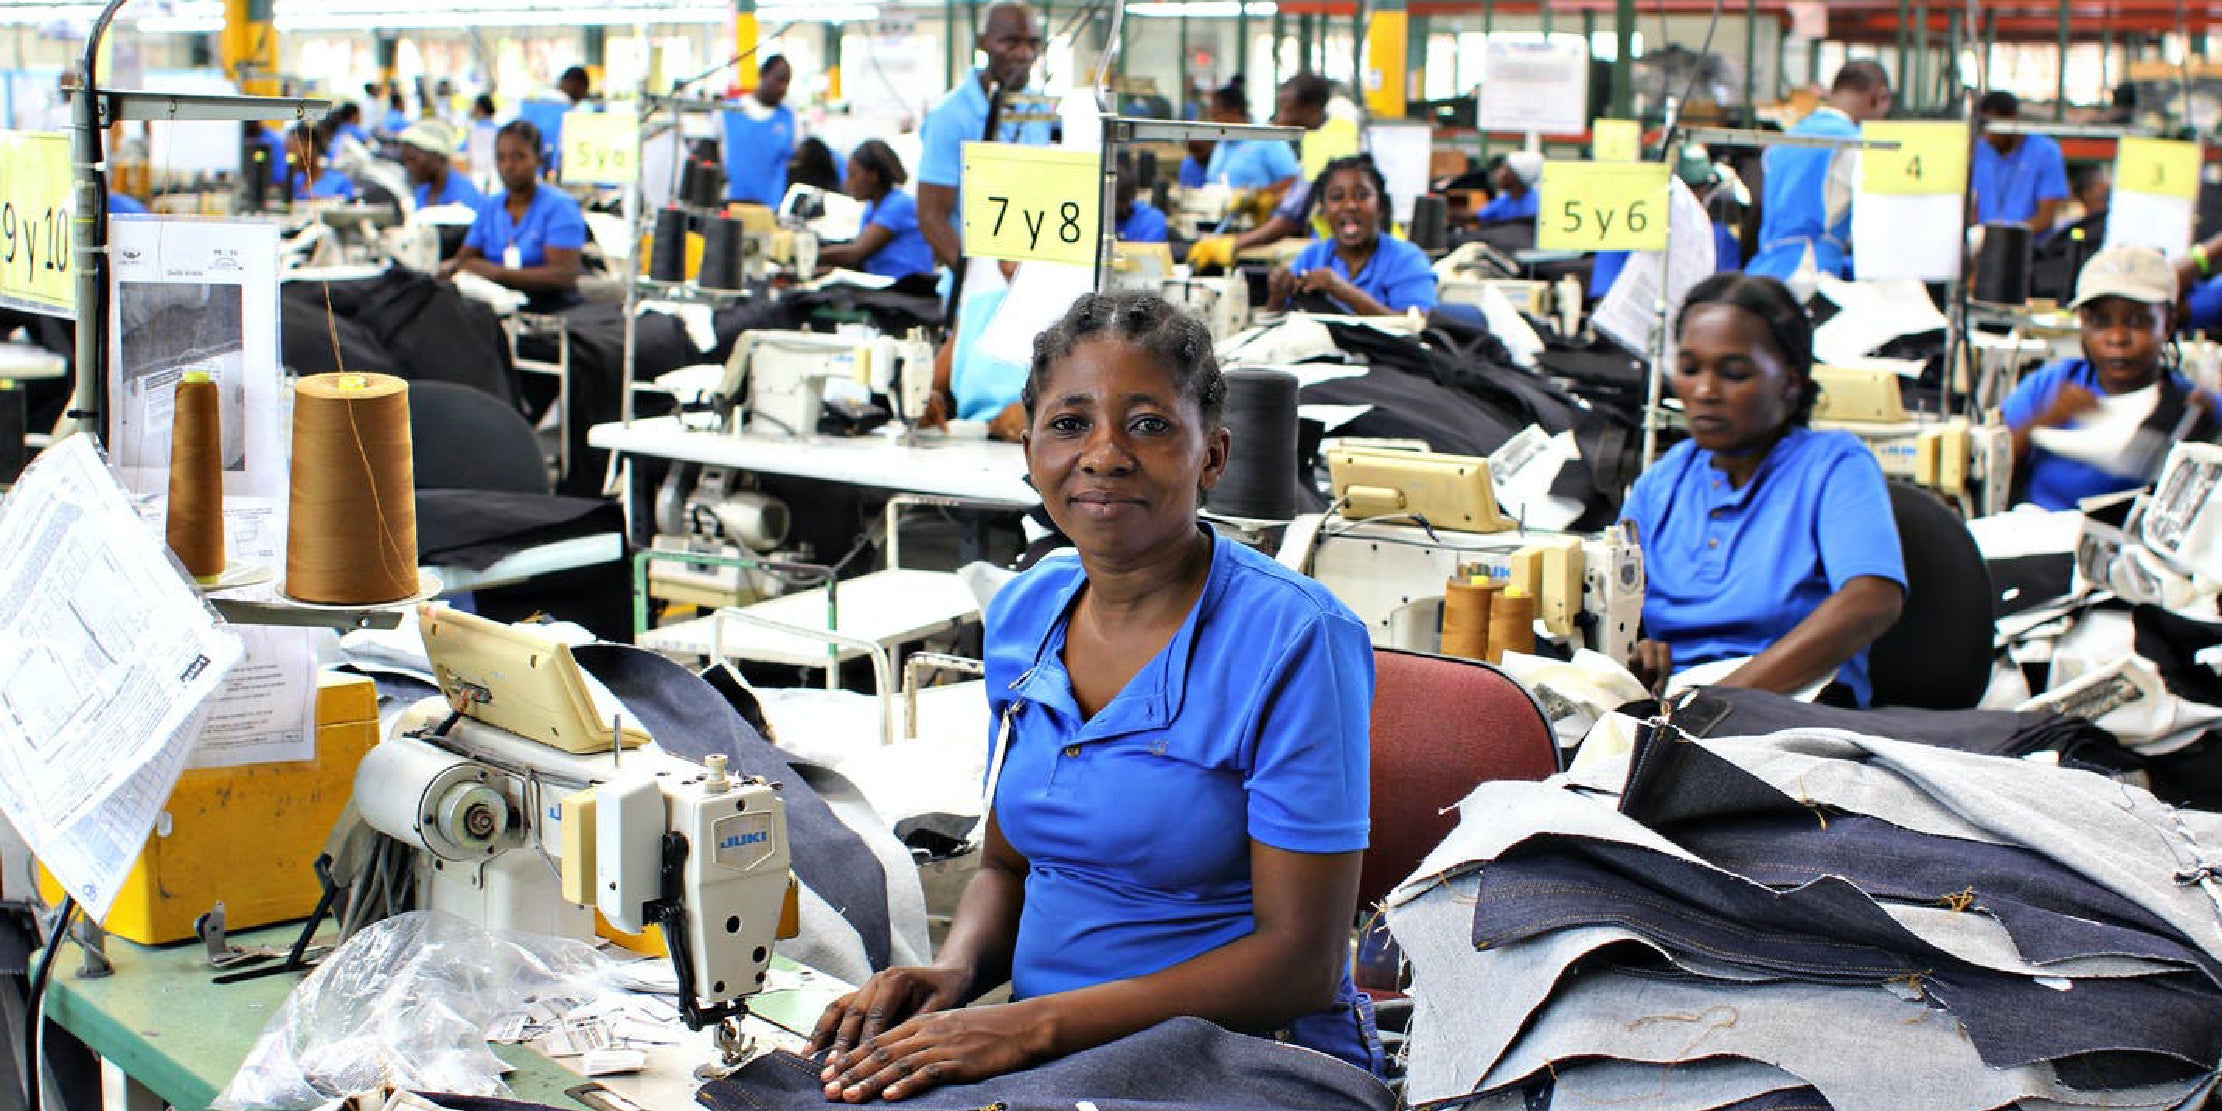 Levi's workers in India